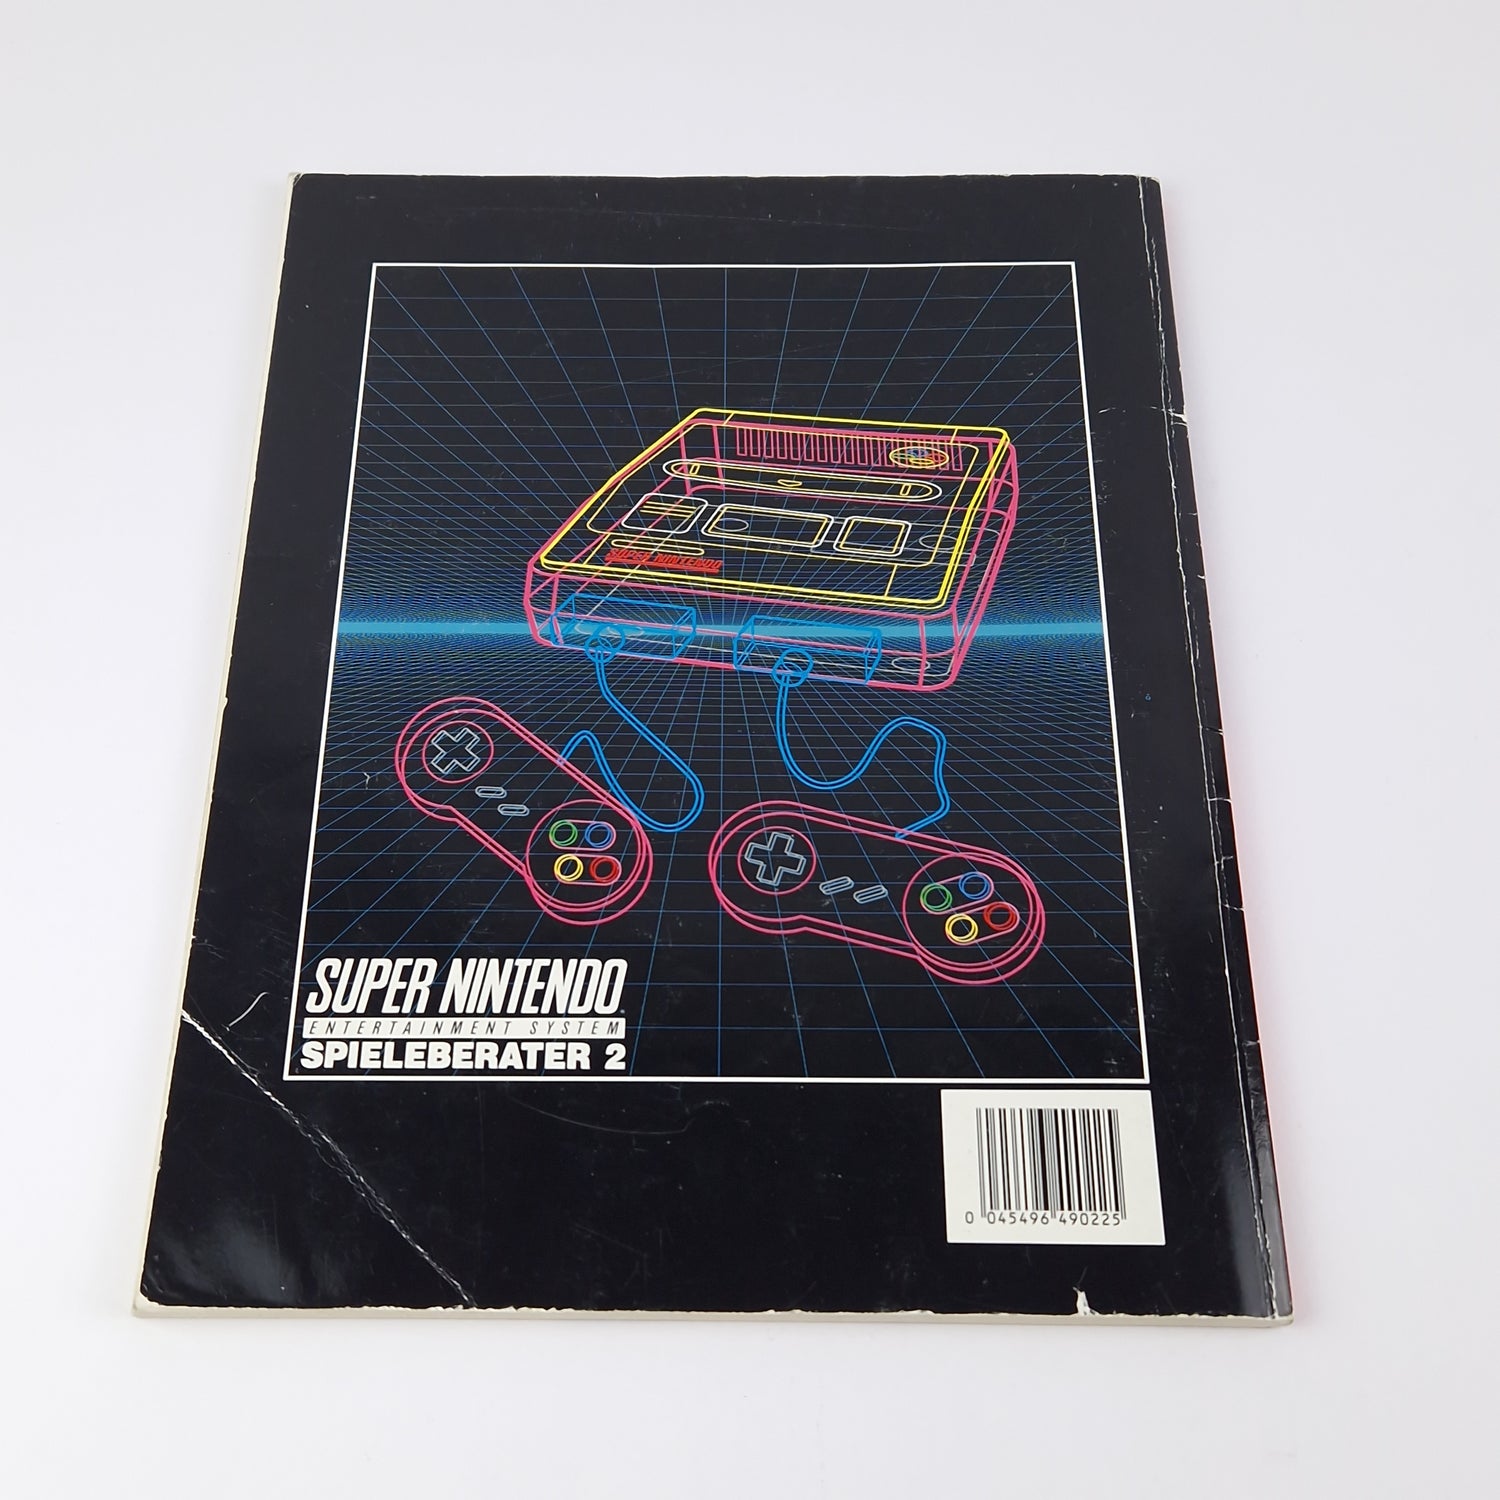 The Official Super Nintendo Game Guide 2 - SNES Guide Book